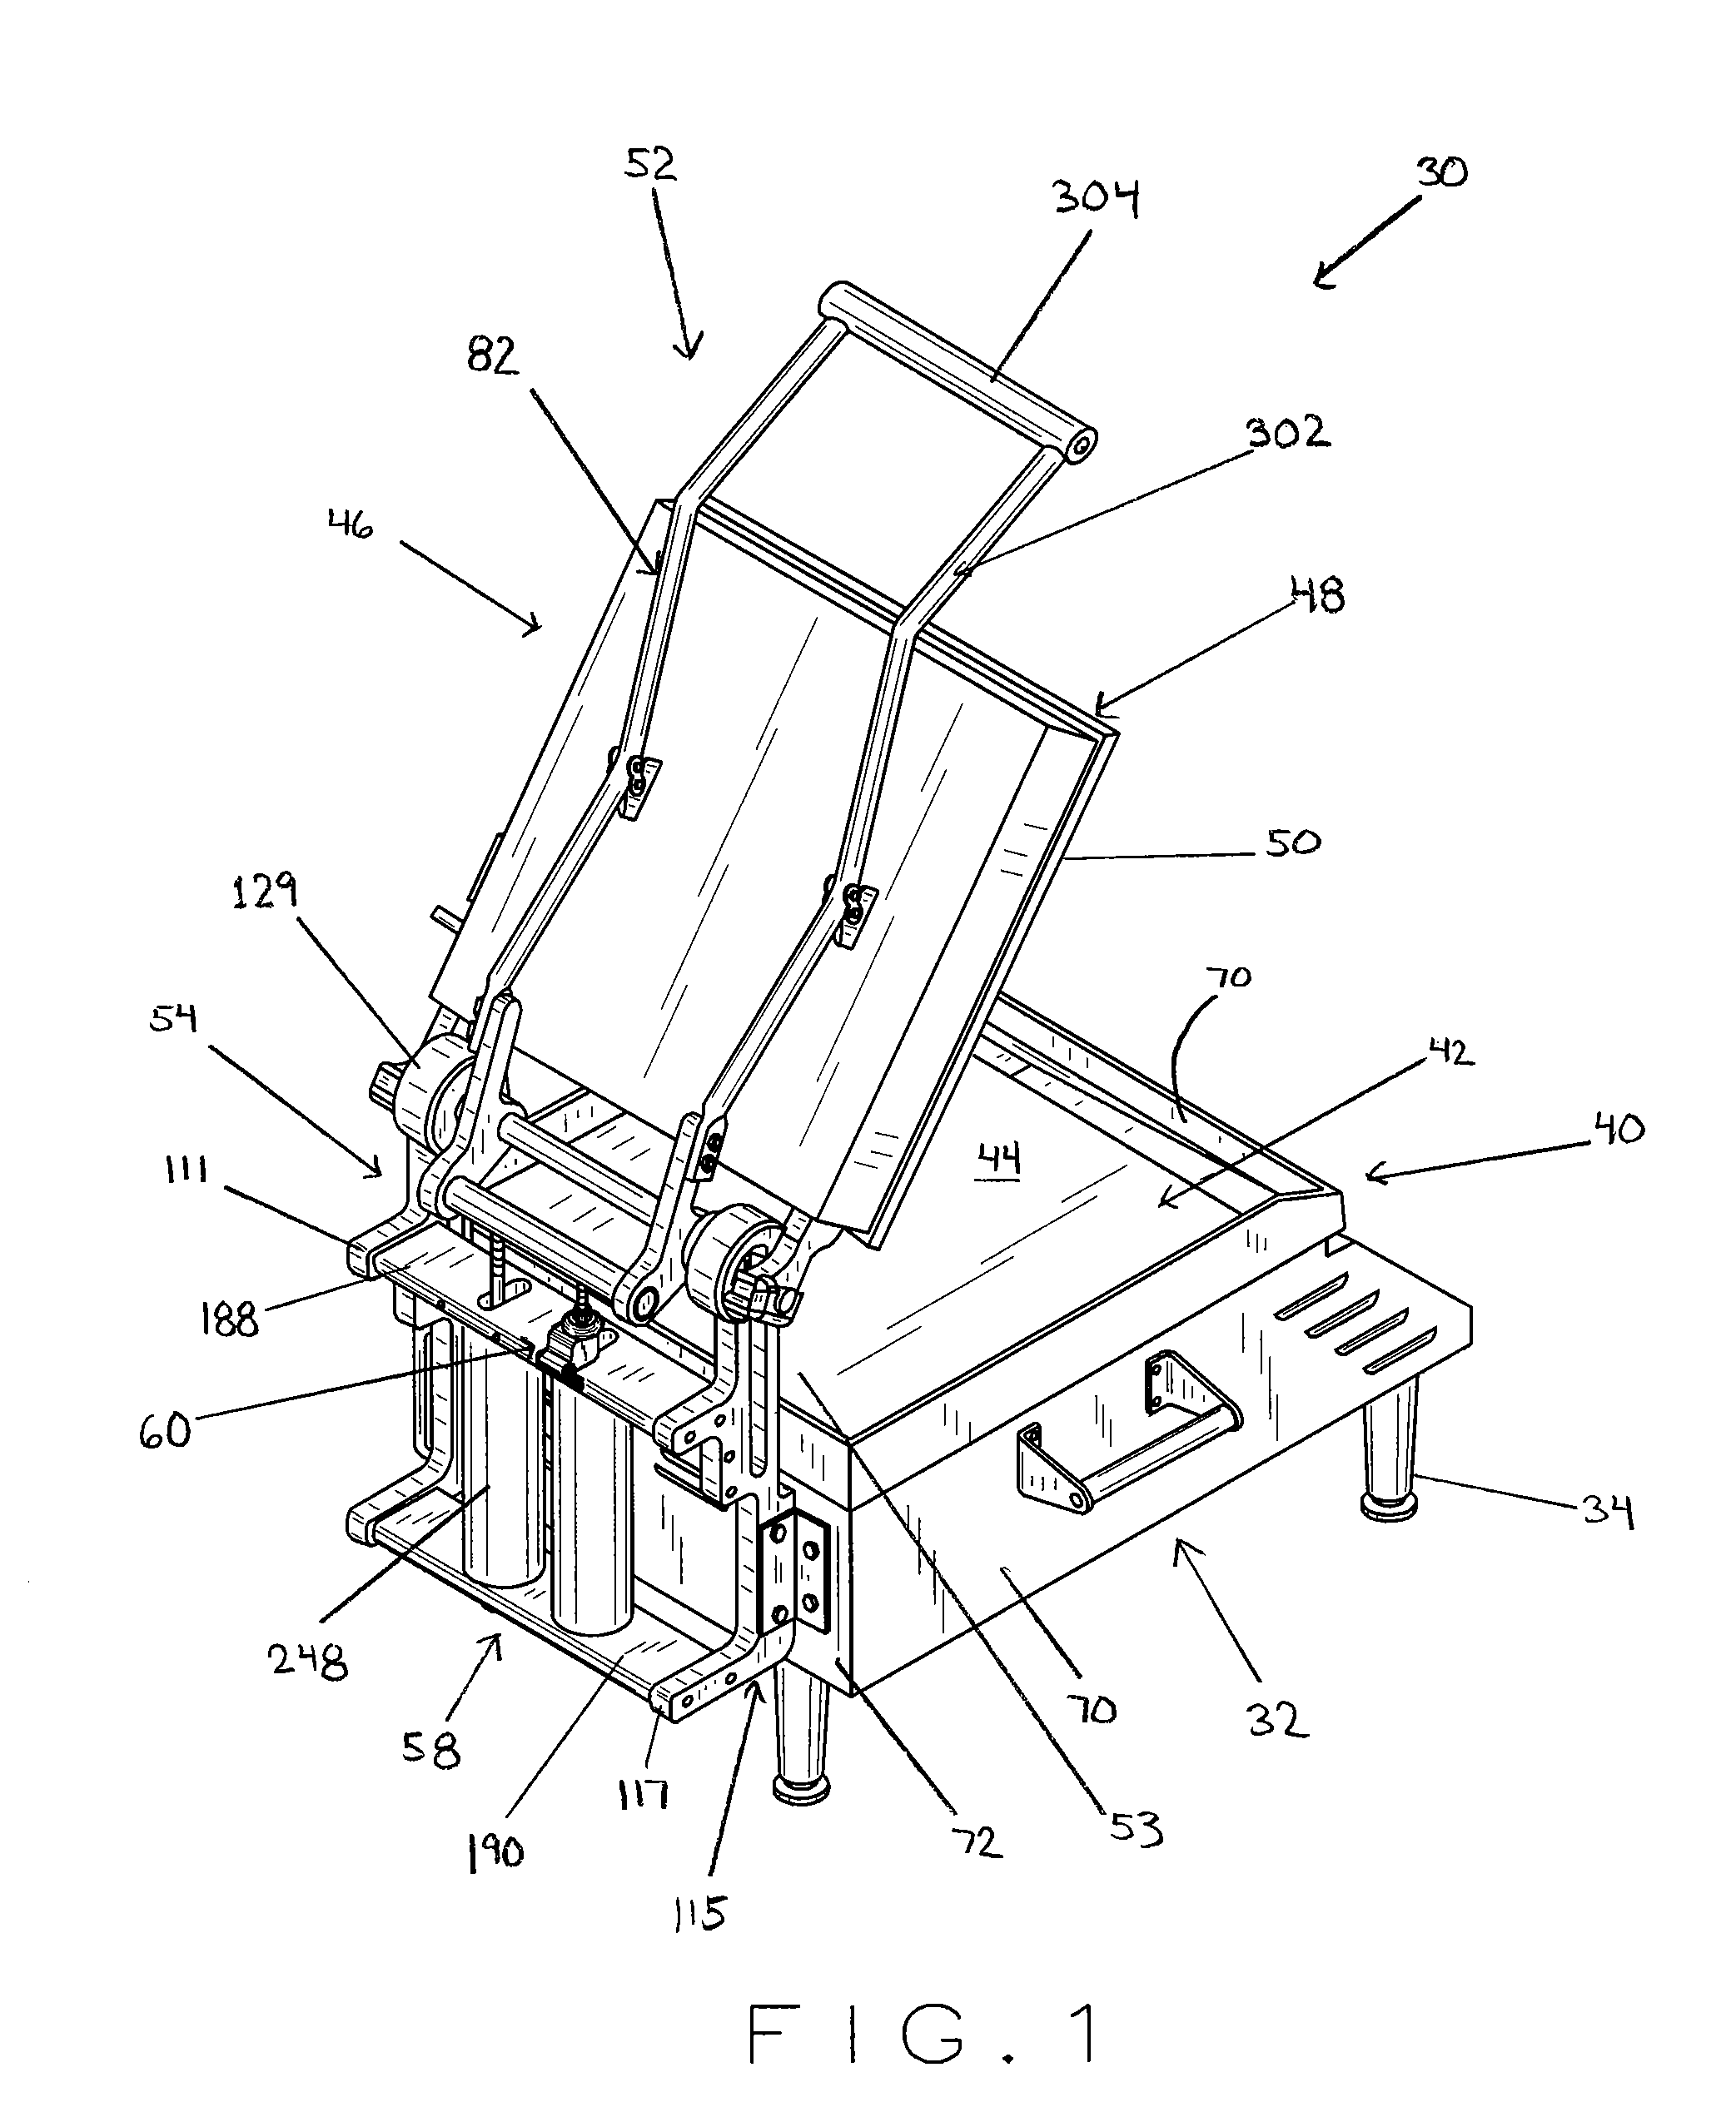 Grill for cooking human food with lower and upper platens and counterbalance assembly